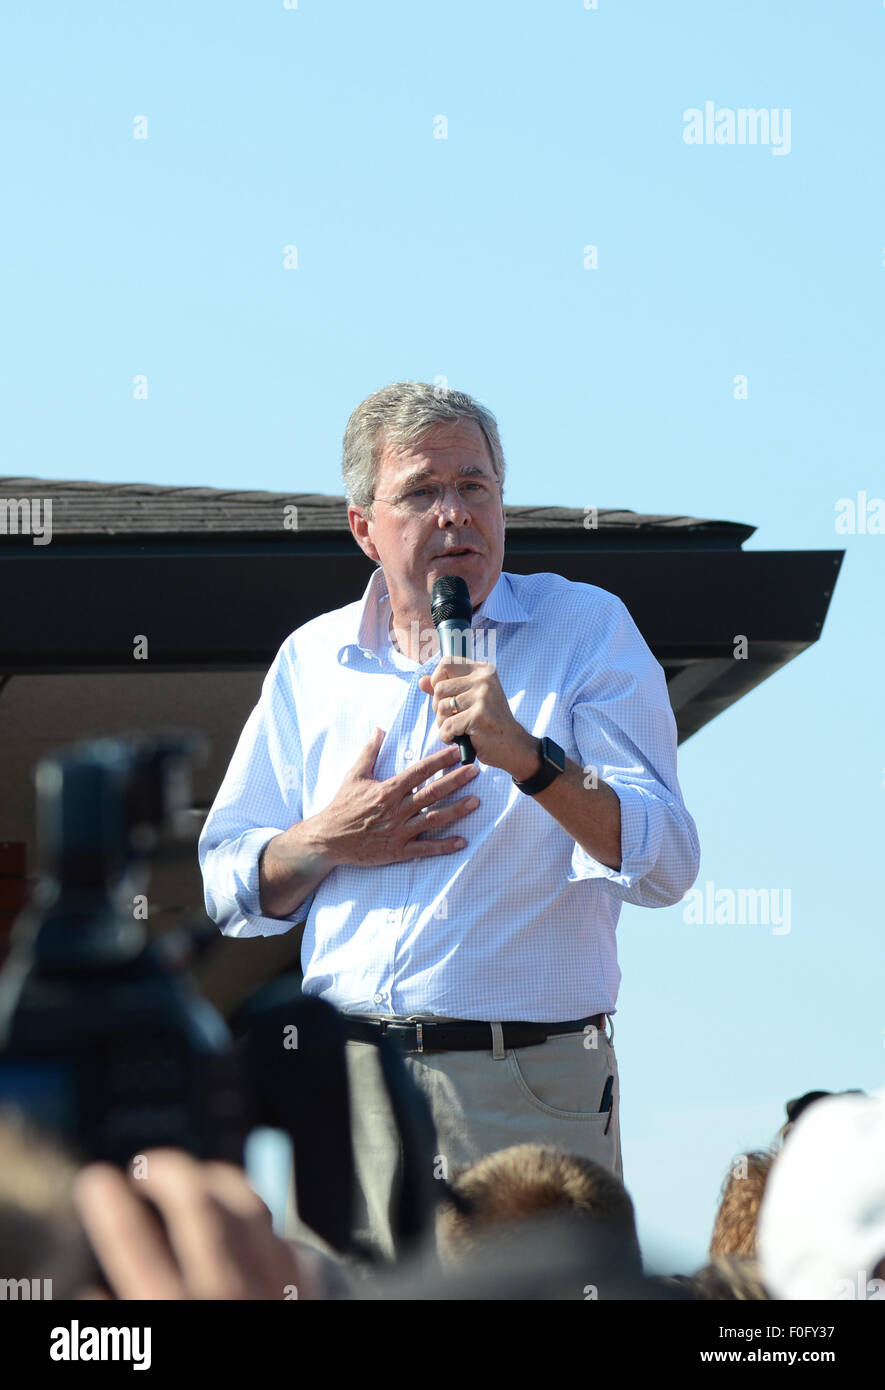 Des Moines, USA. 14th Aug, 2015. U.S. Republican presidential candidate Jeb Bush speaks to supporters at the Iowa State Fair in Des Moines, the United States, Aug. 14, 2015. U.S. Republican presidential candidate Jeb Bush on Friday criticized the Obama administration for the dysfunctional political system, pledging to restore bipartisanship in Washington to get things done. Credit:  Zheng Qihang/Xinhua/Alamy Live News Stock Photo